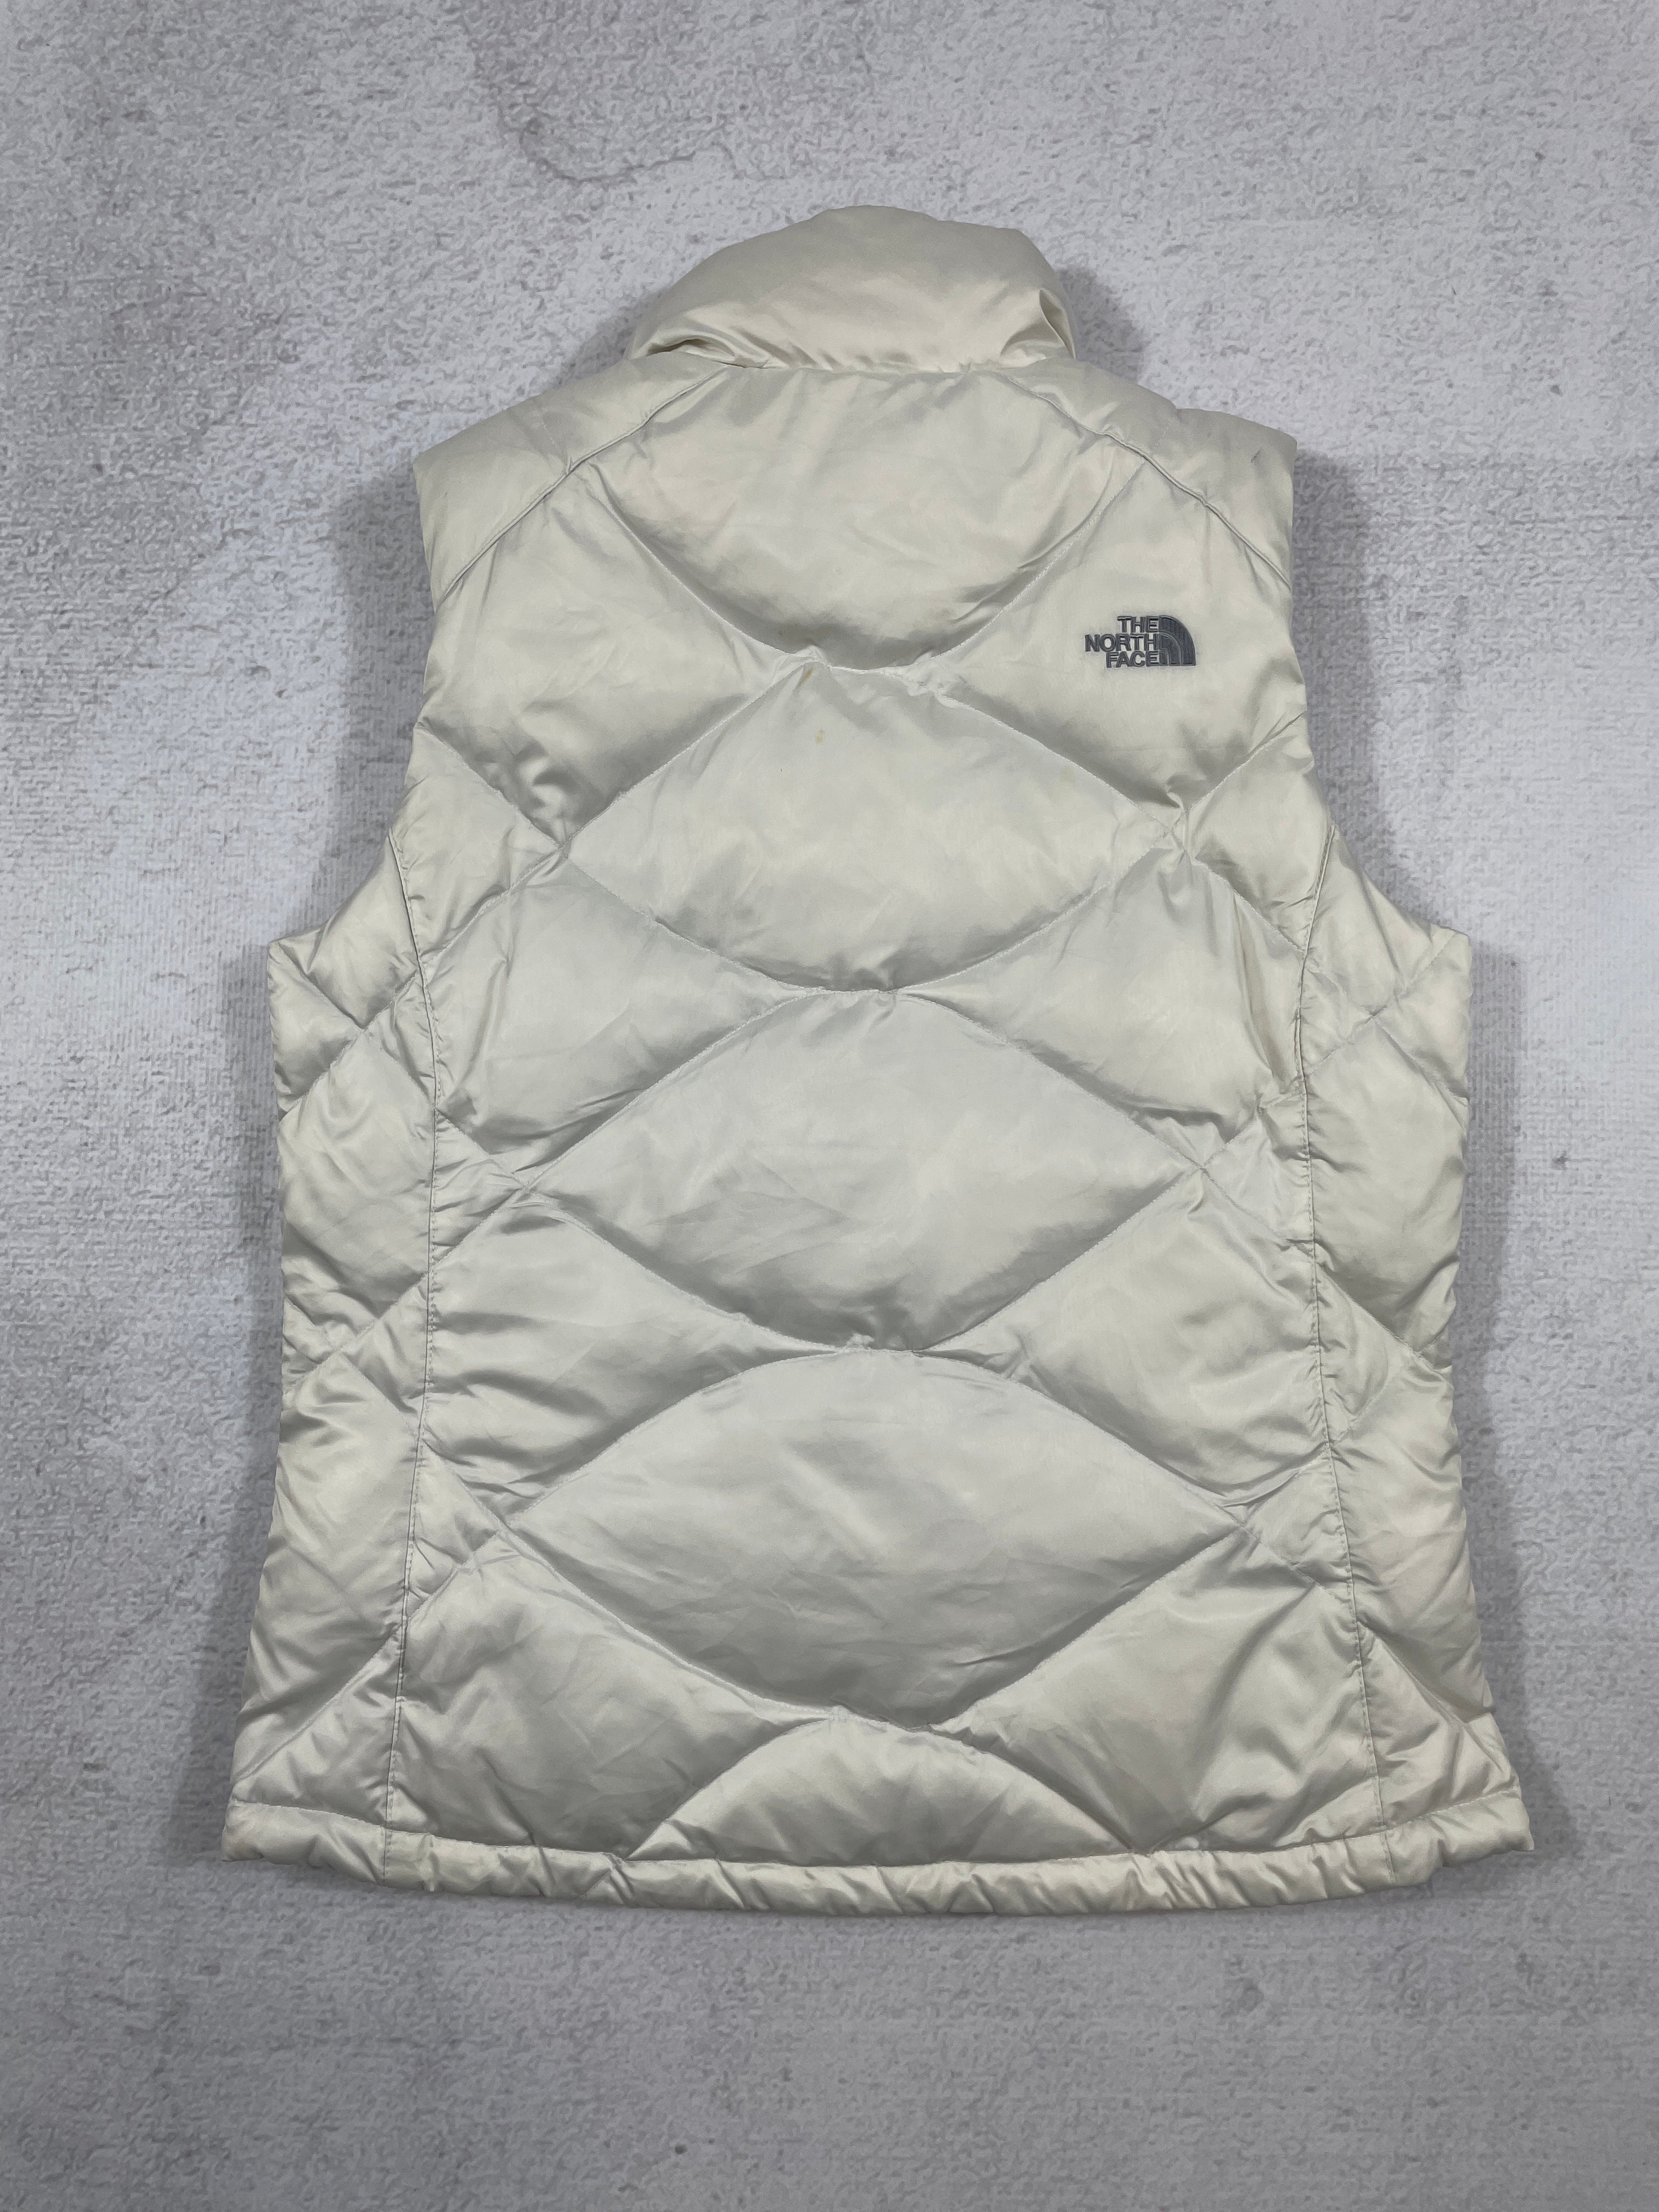 Vintage The North Face 550 Series Insulated Vest - Women's Large